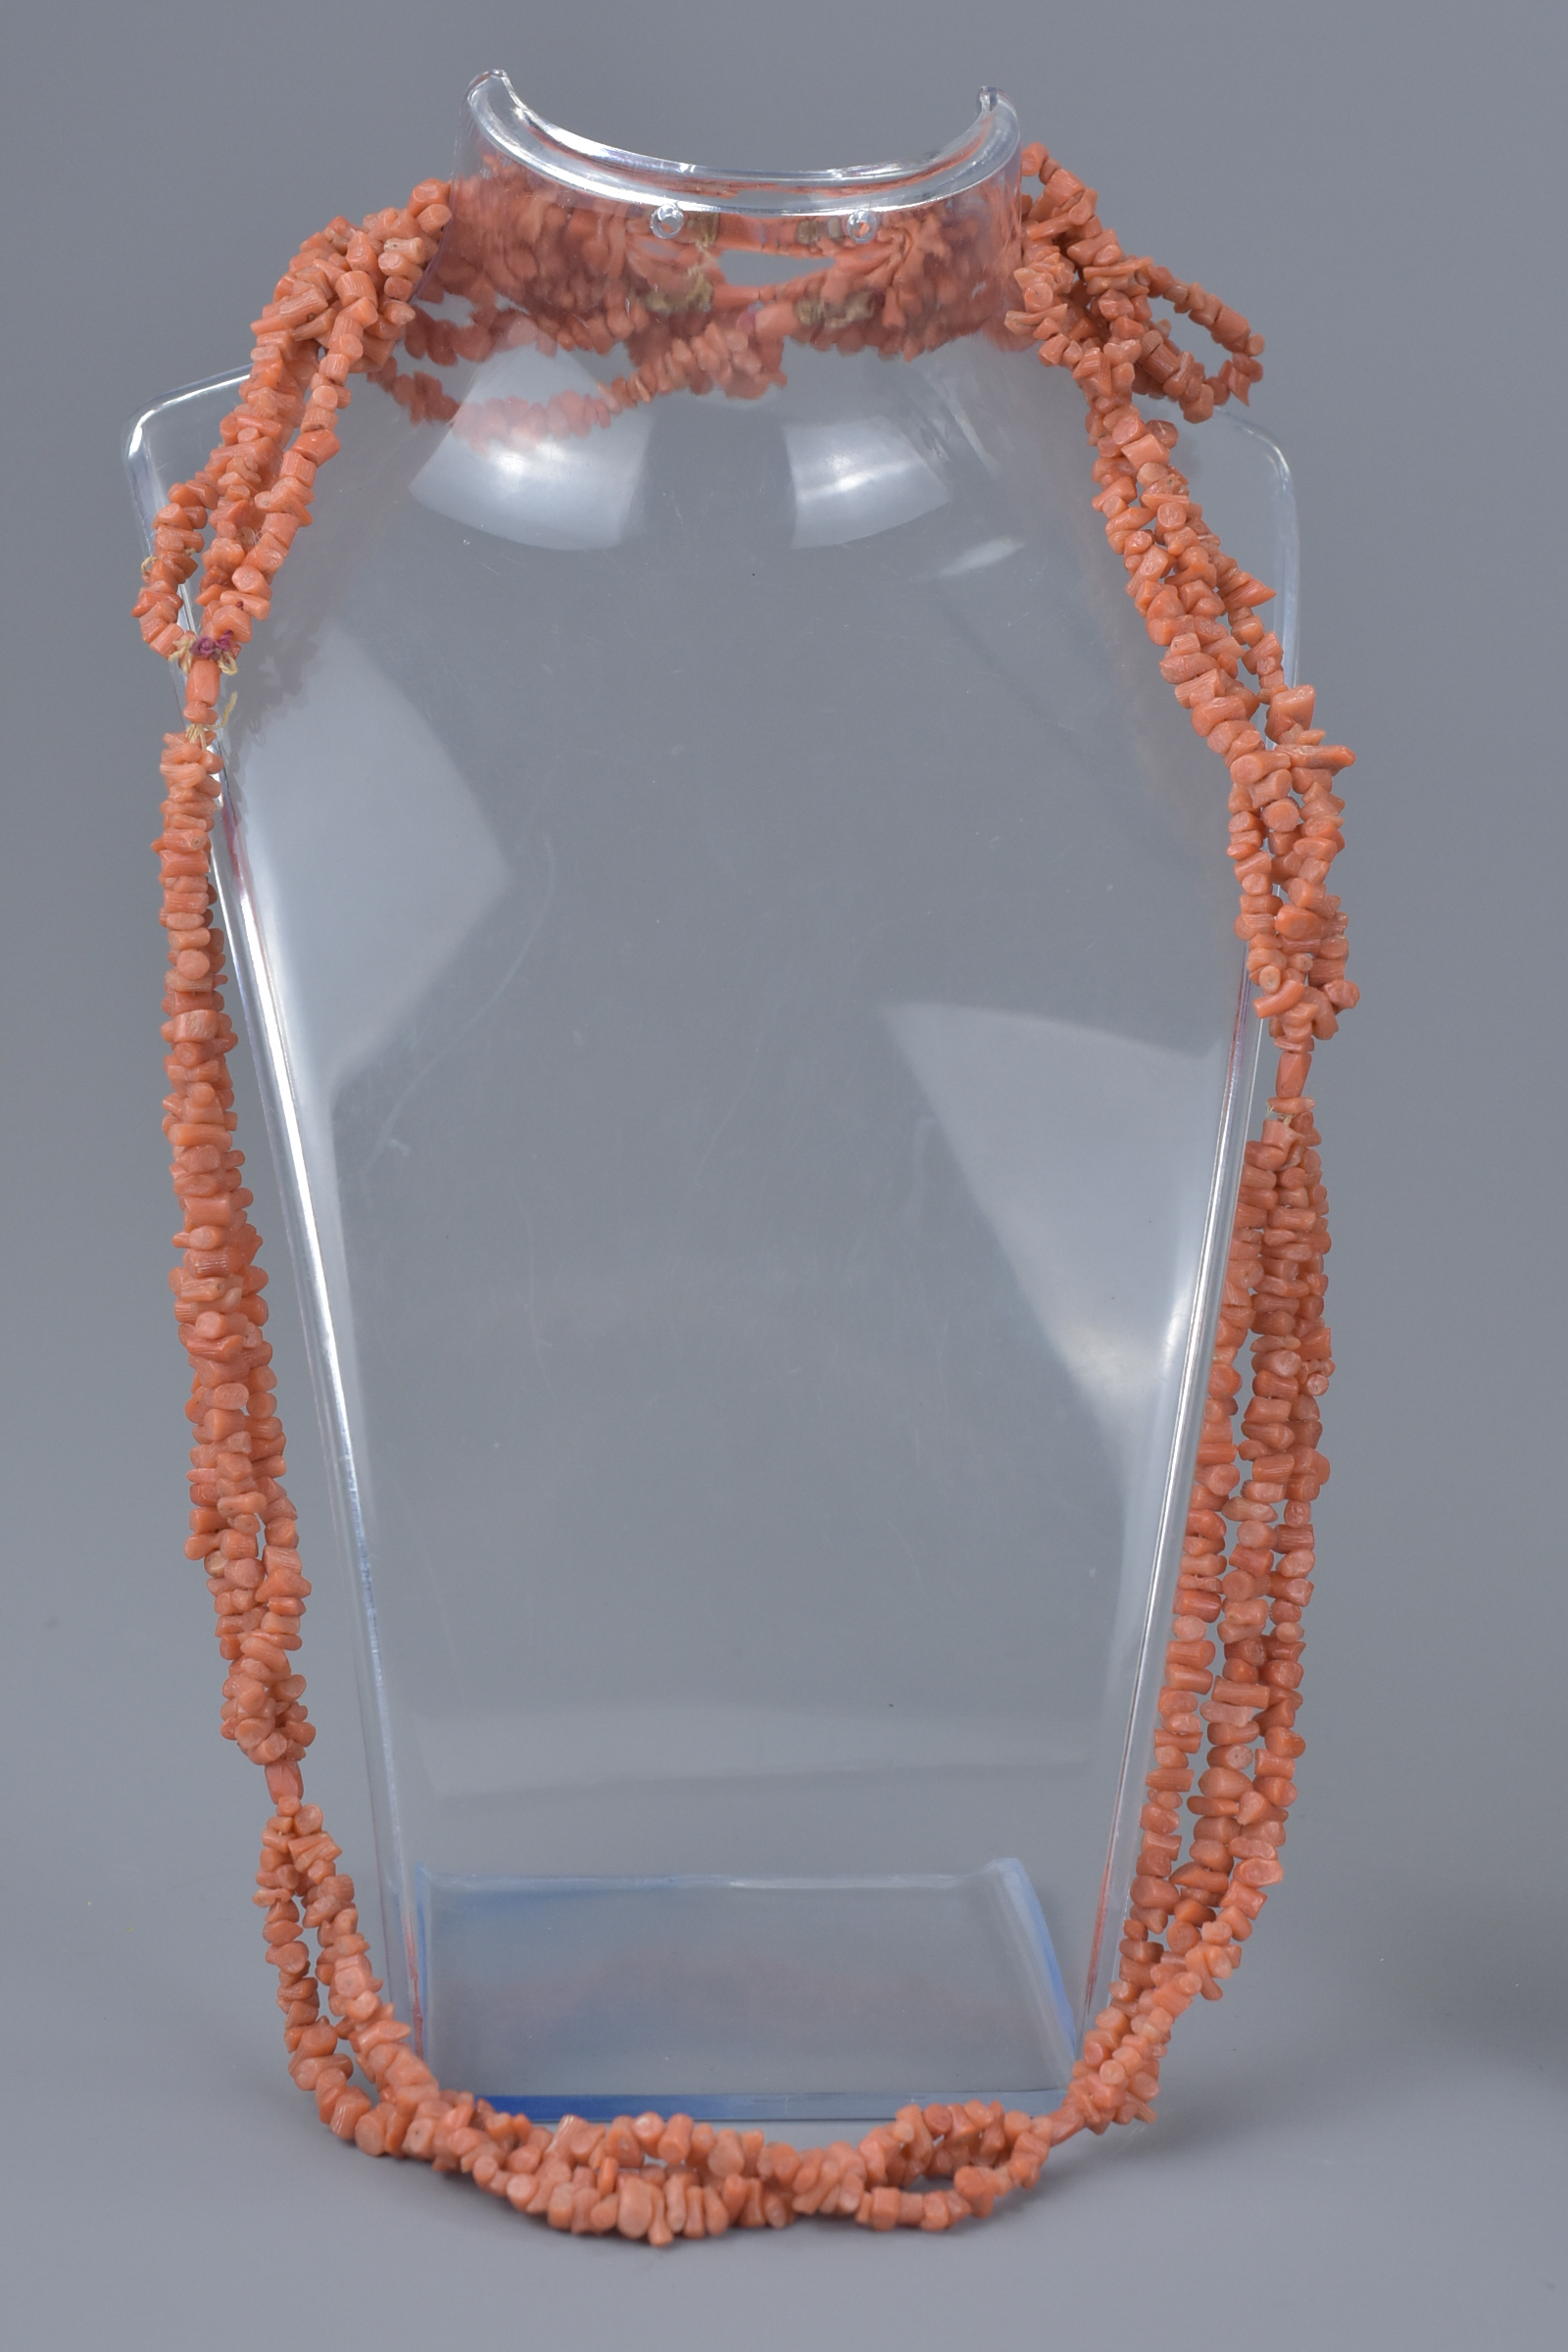 Three Strand Coral Bead Necklace - Image 2 of 7